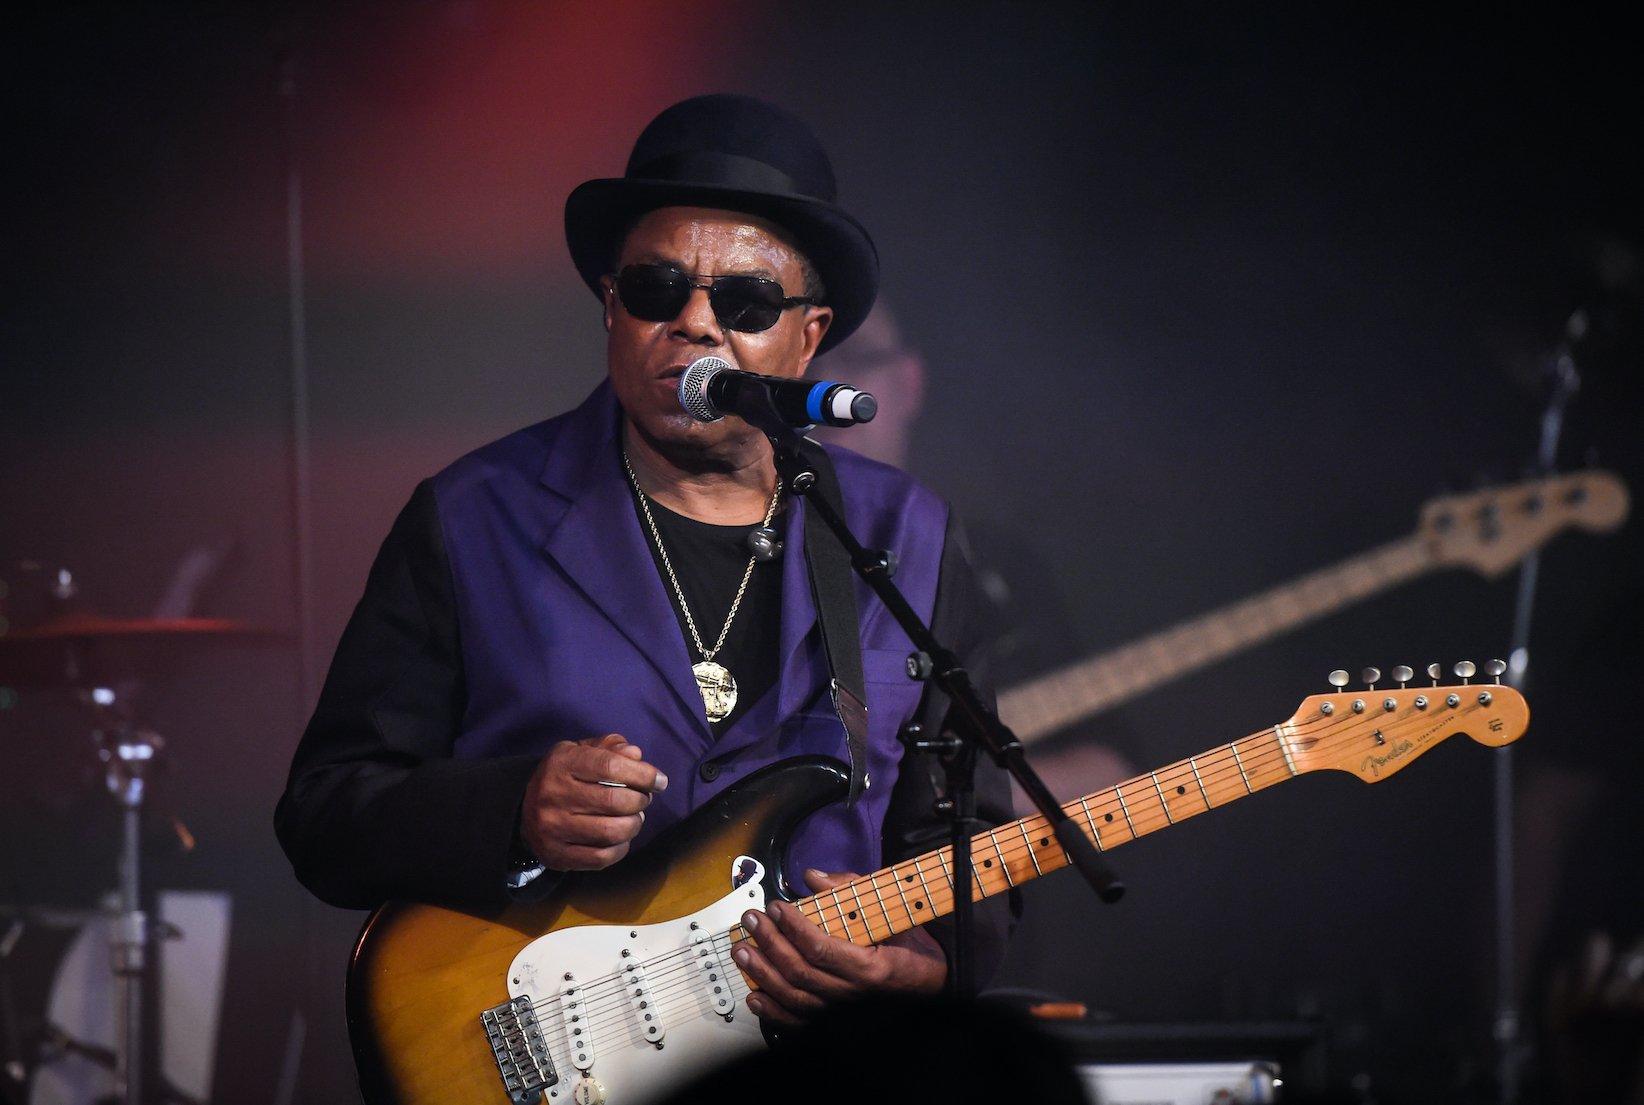 Tito Jackson On His New Blues Album 'Under Your Spell' & His